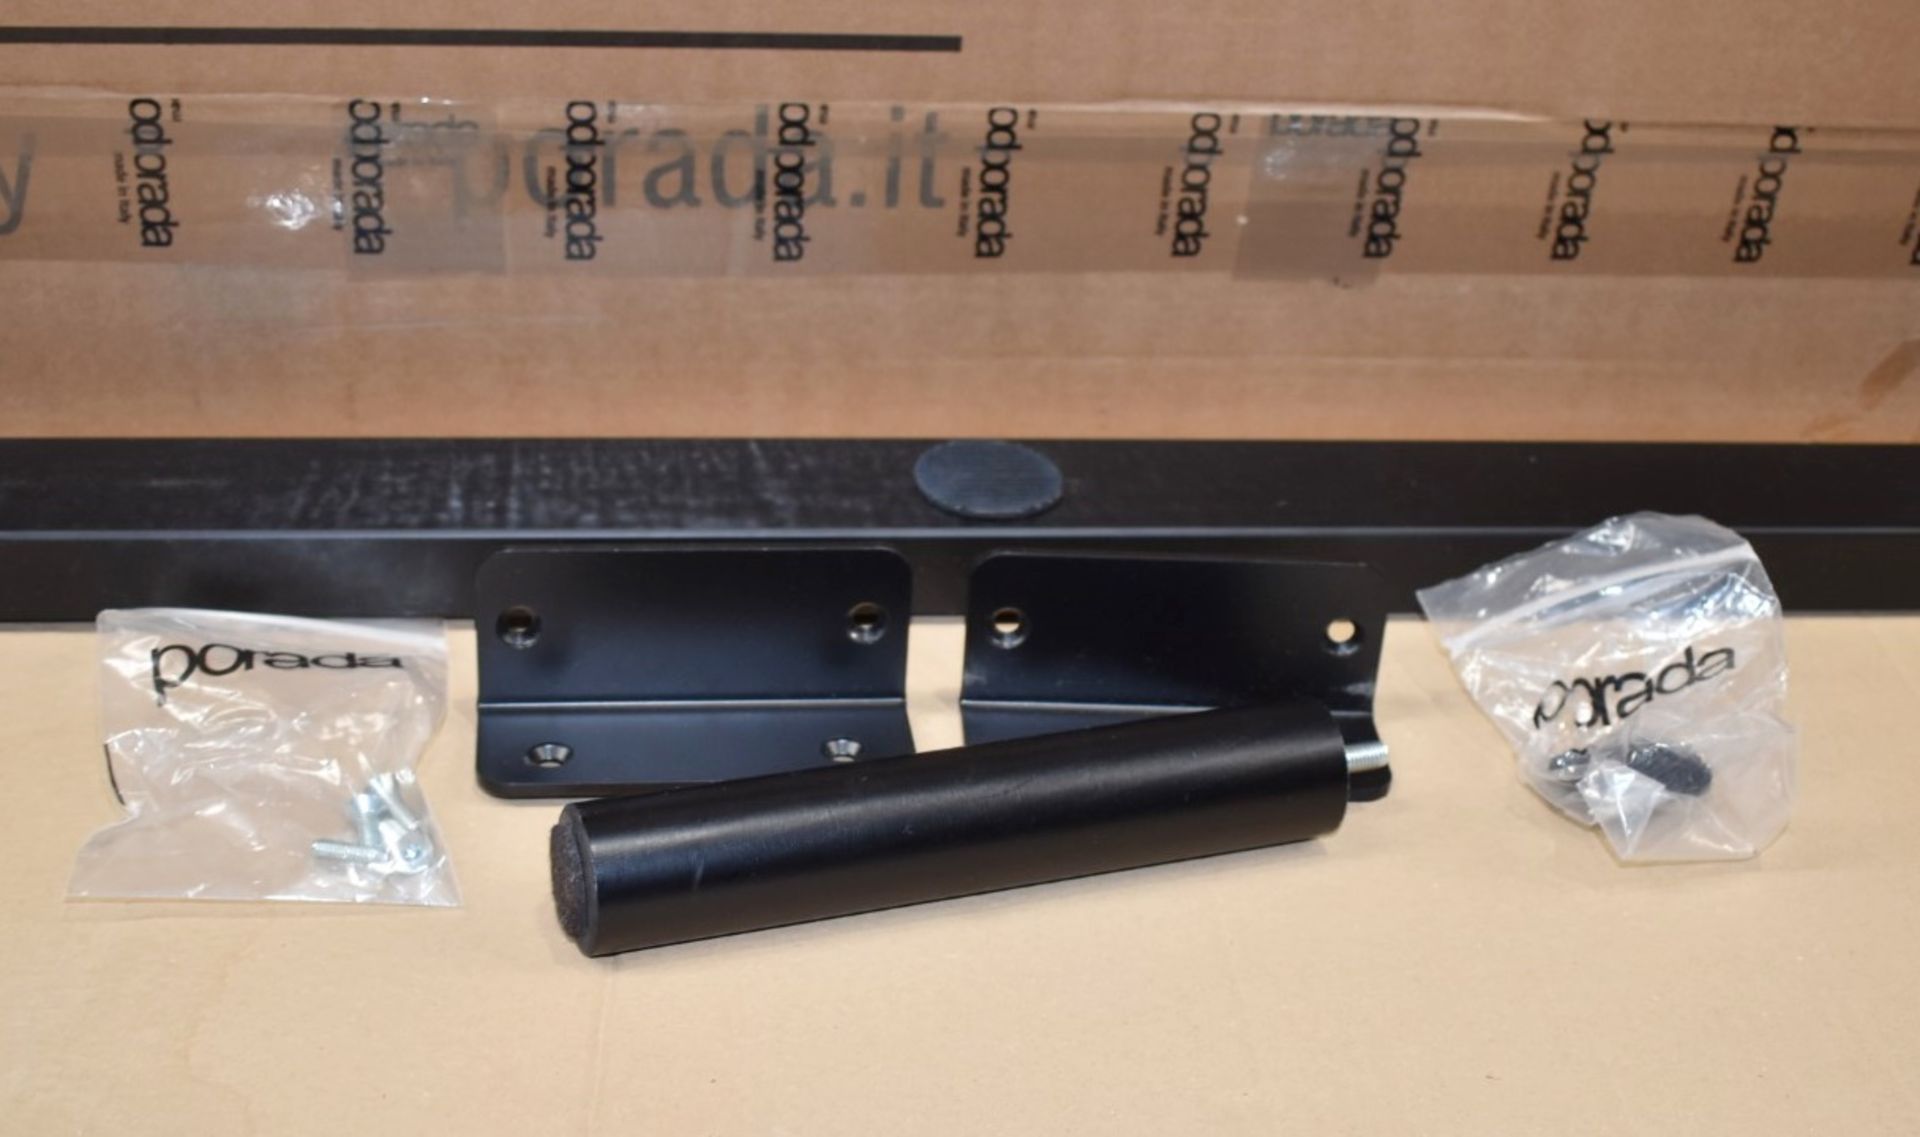 1 x PORADA Metal Bar Support Bar For Bed Base - Unused Boxed Stock - Ref: 7179813/HJL677/11-23 - - Image 3 of 5